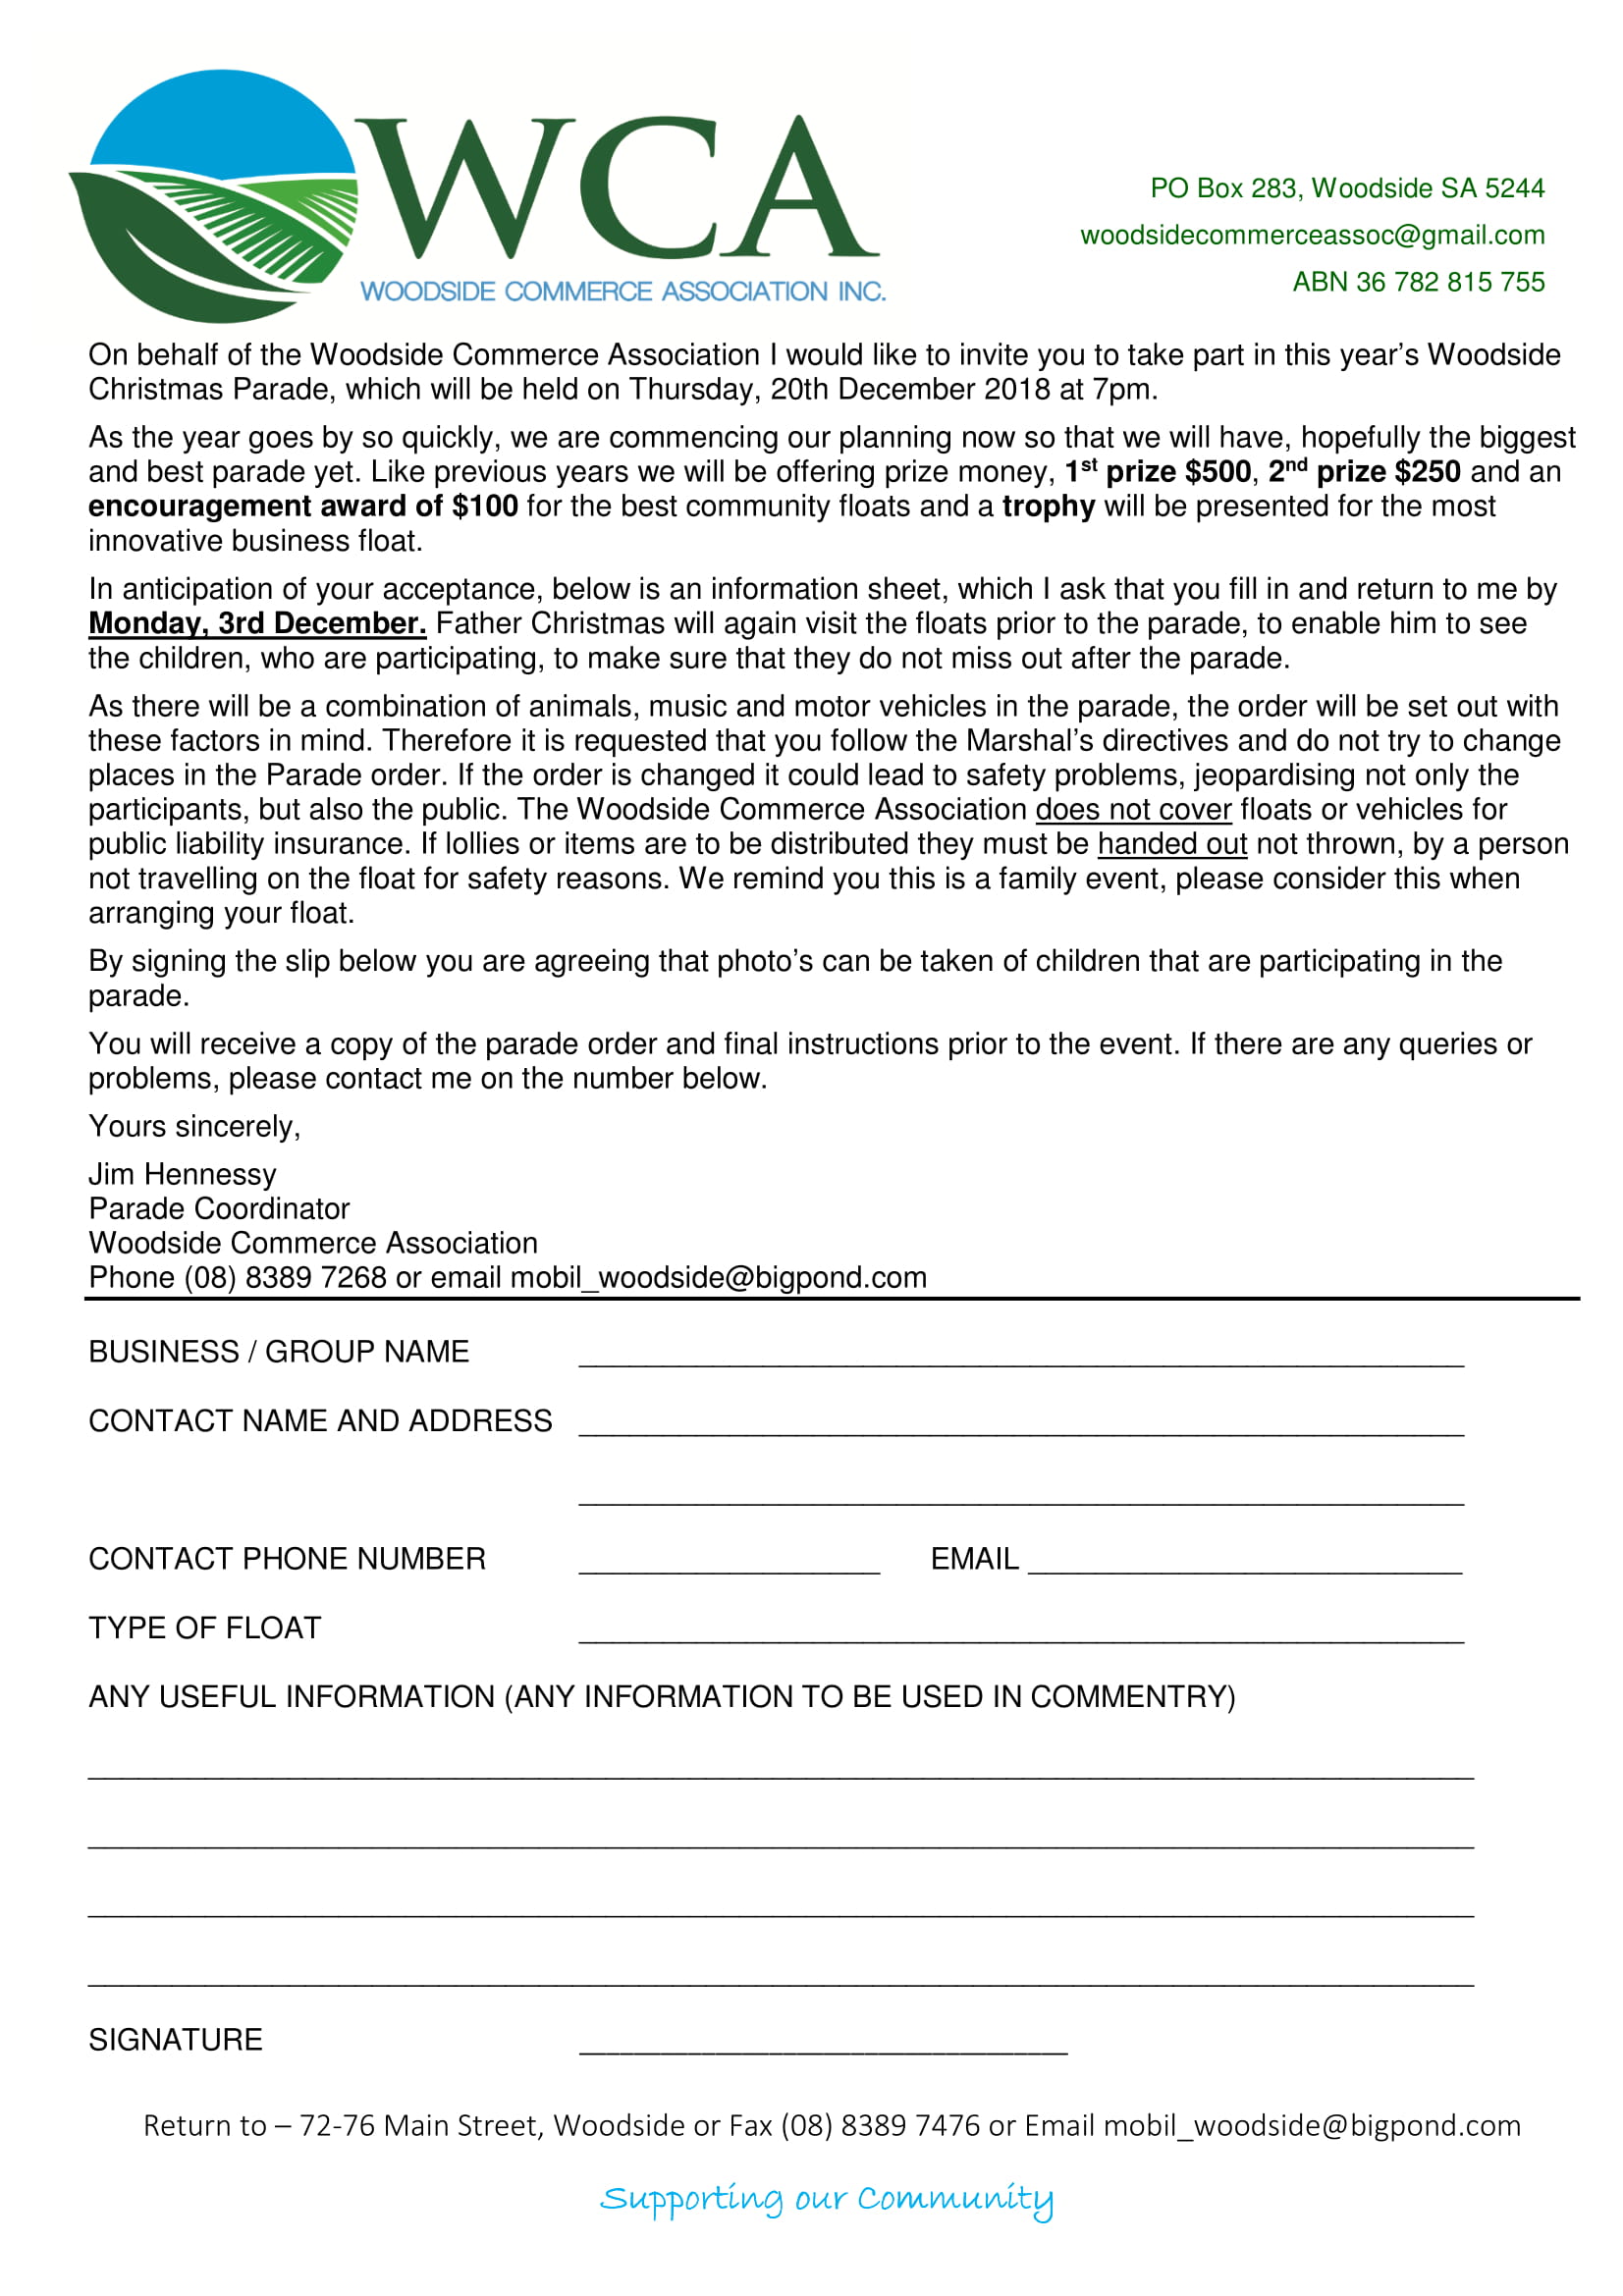 Woodside Christmas Pageant 2018 Entry Form